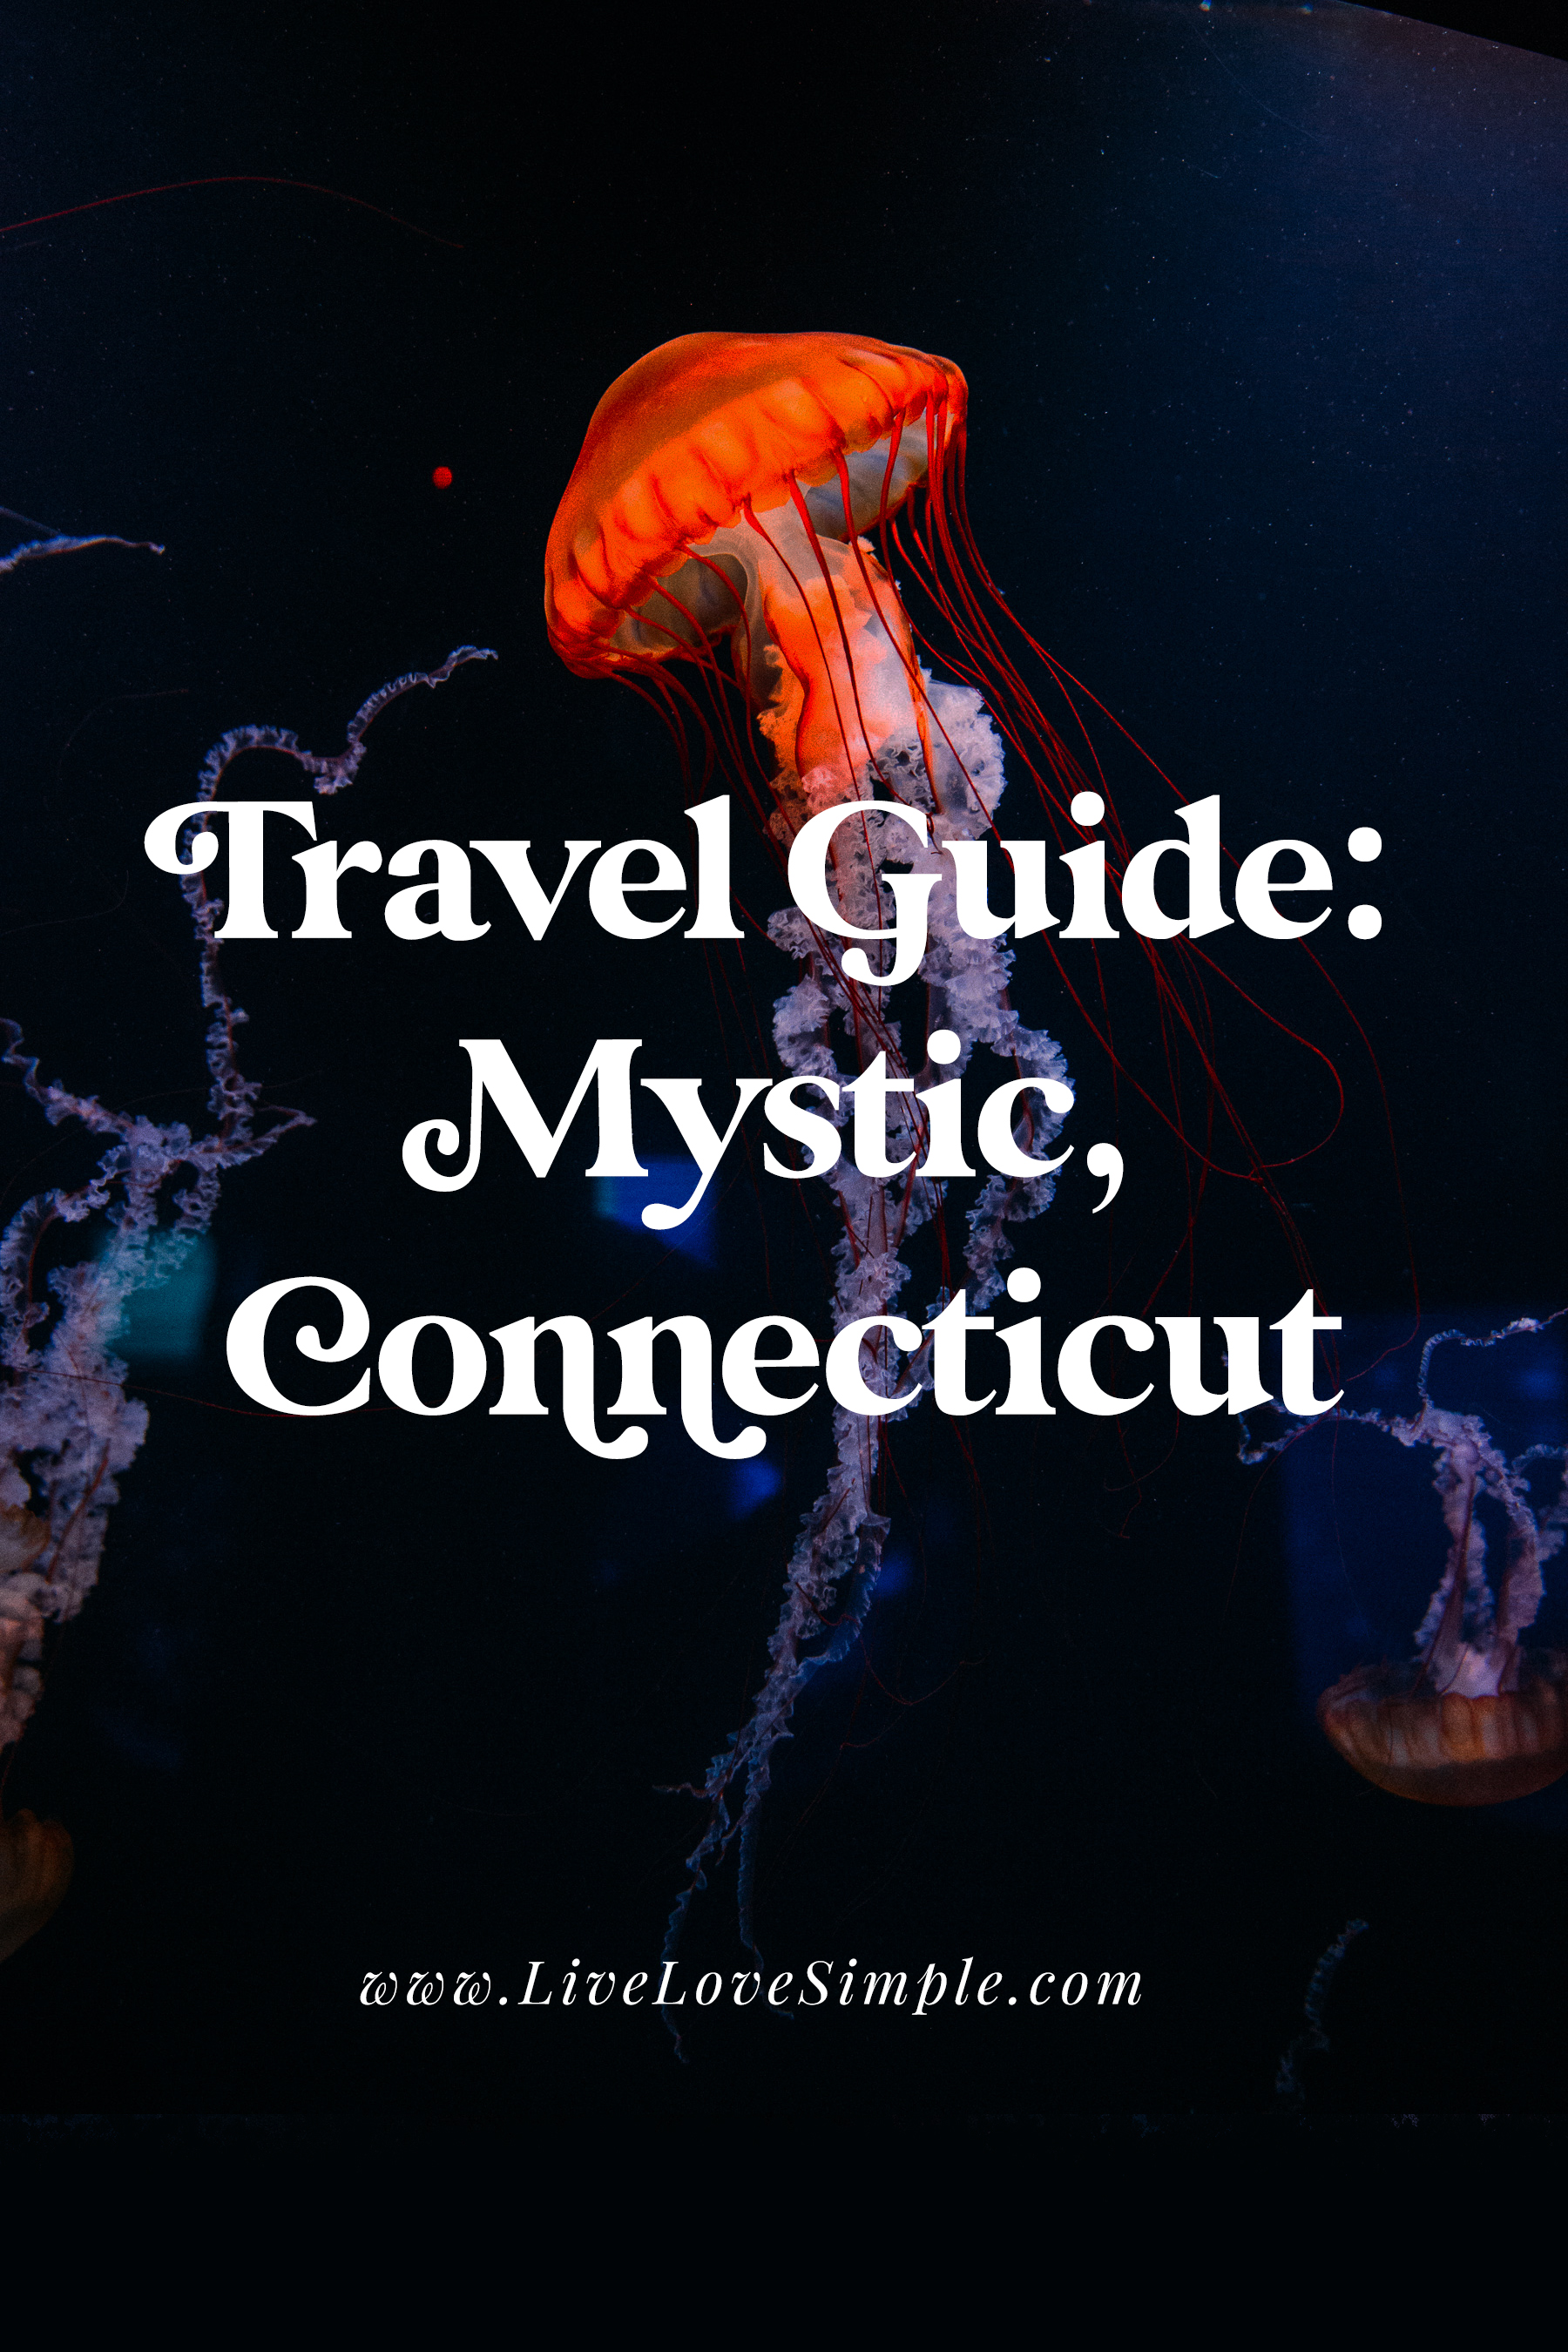 Travel Guide Mystic